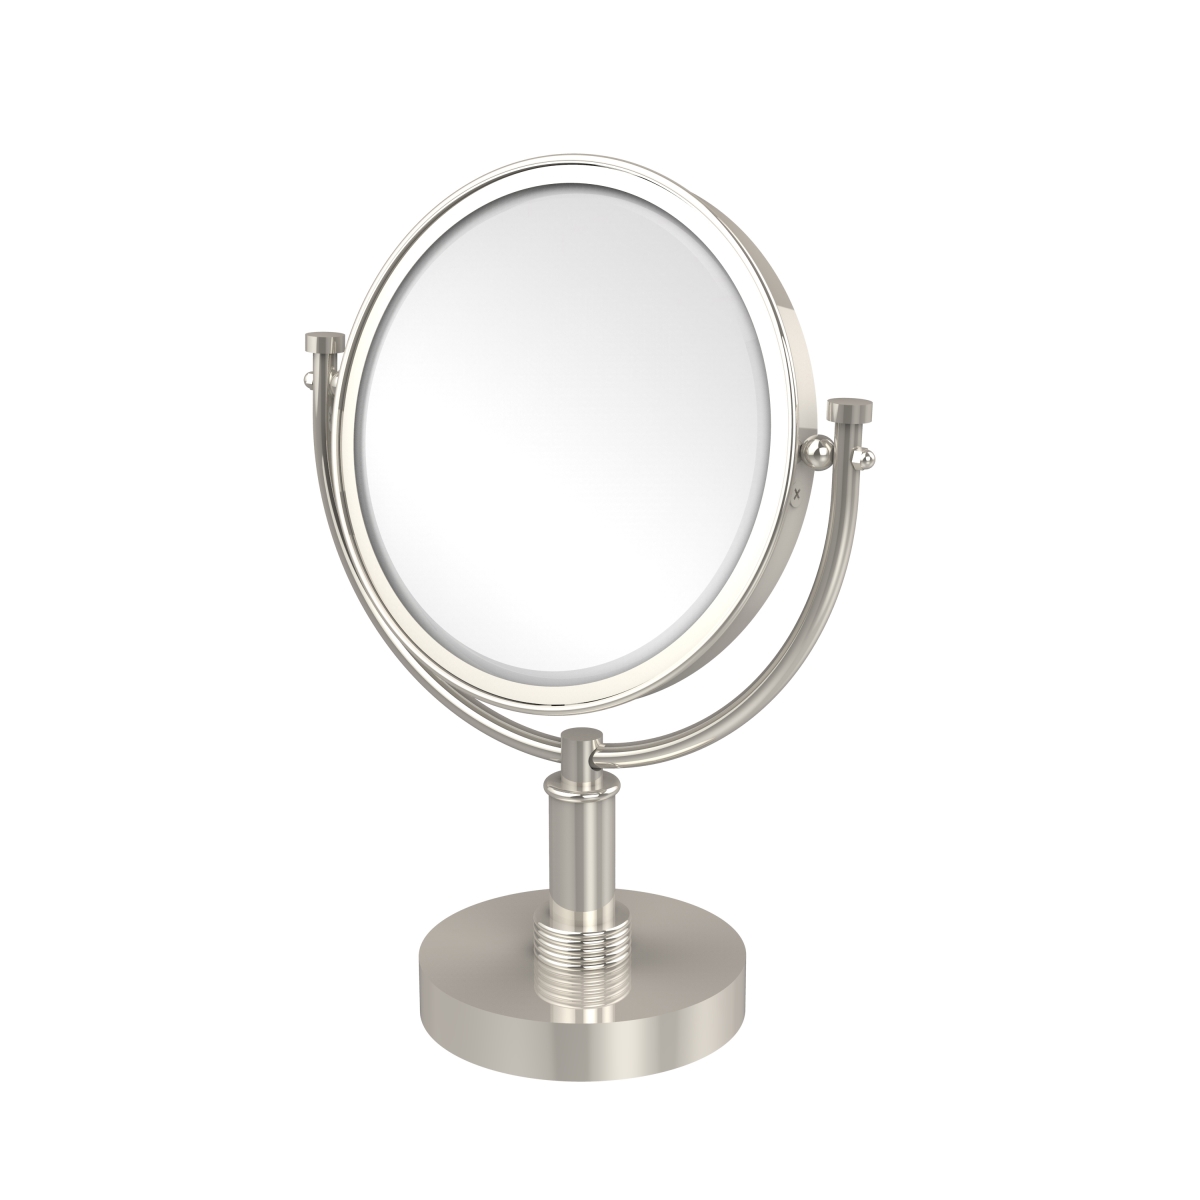 DM-4G-2X-PNI 8 in. Vanity Top Make-Up Mirror 2X Magnification, Polished Nickel - 15 x 8 x 8 in -  Allied Brass, DM-4G/2X-PNI